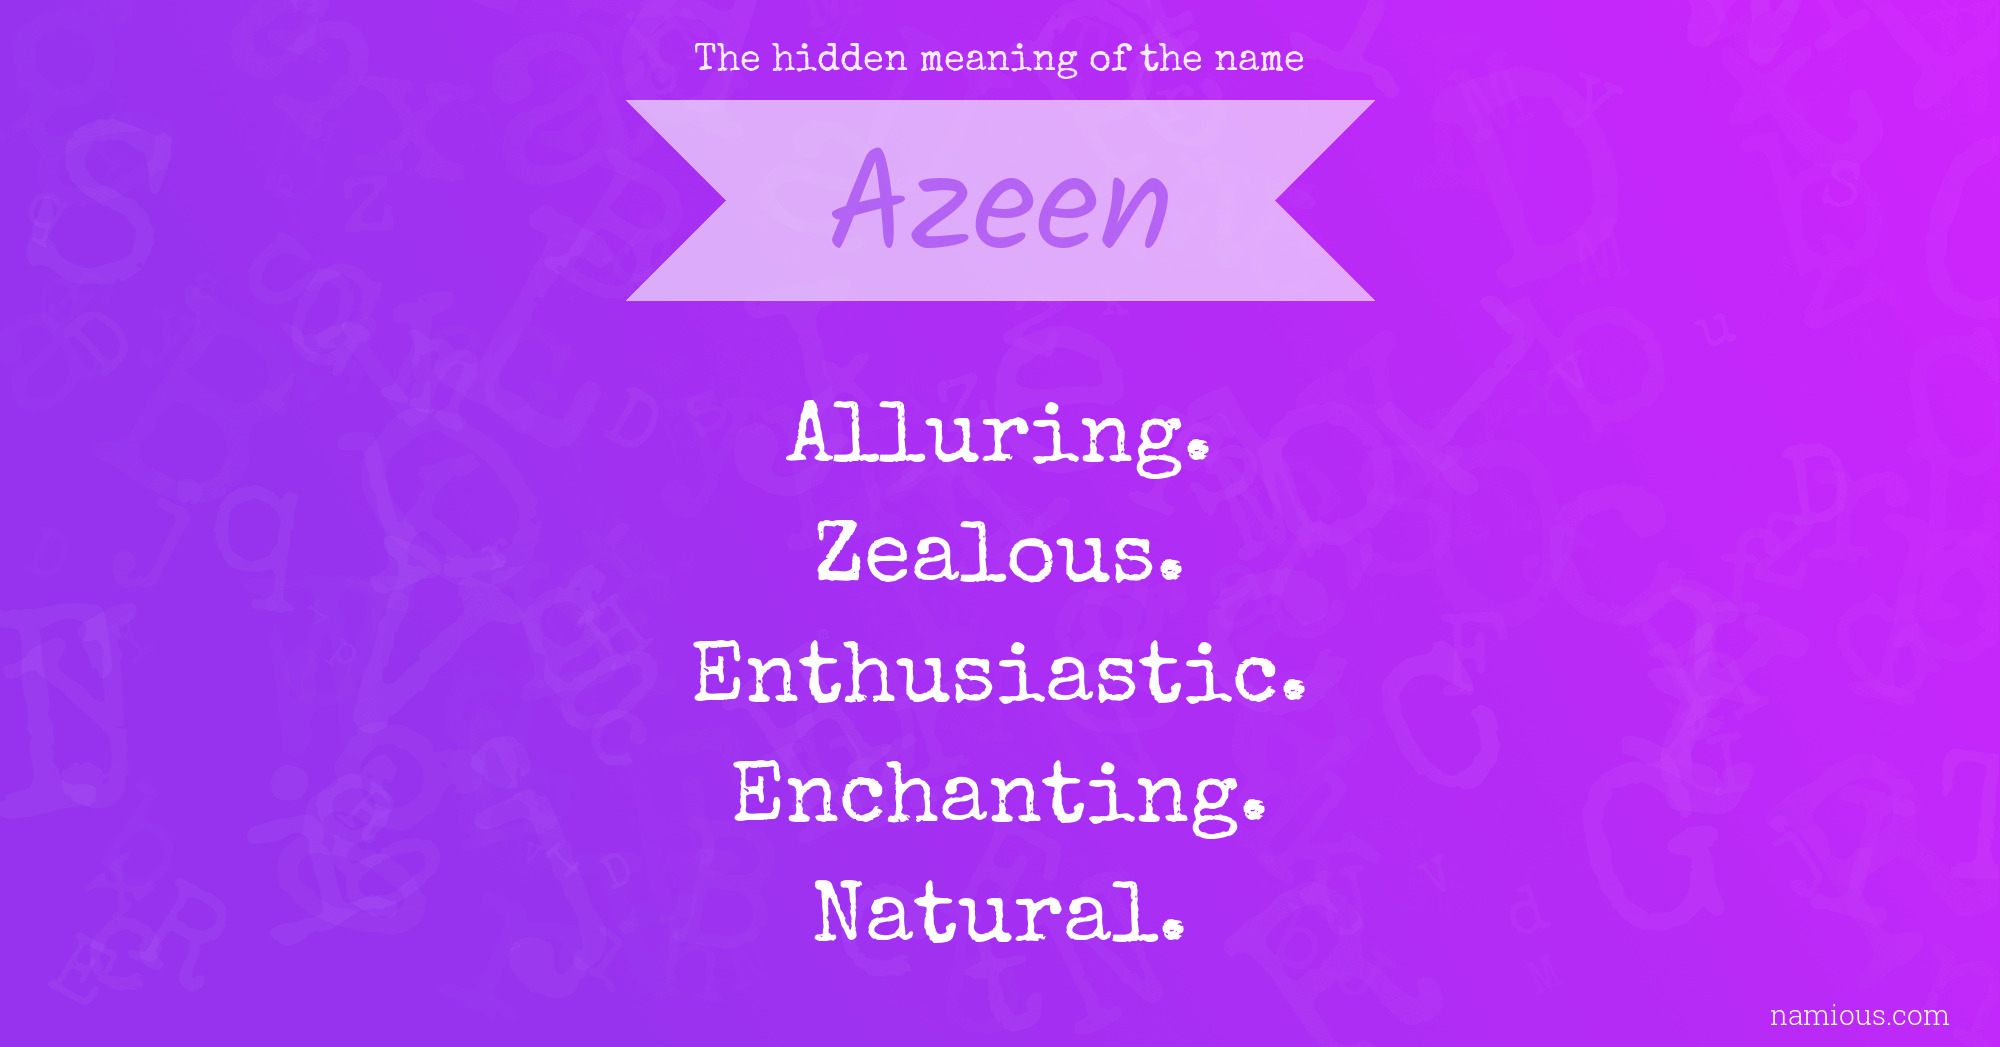 The hidden meaning of the name Azeen